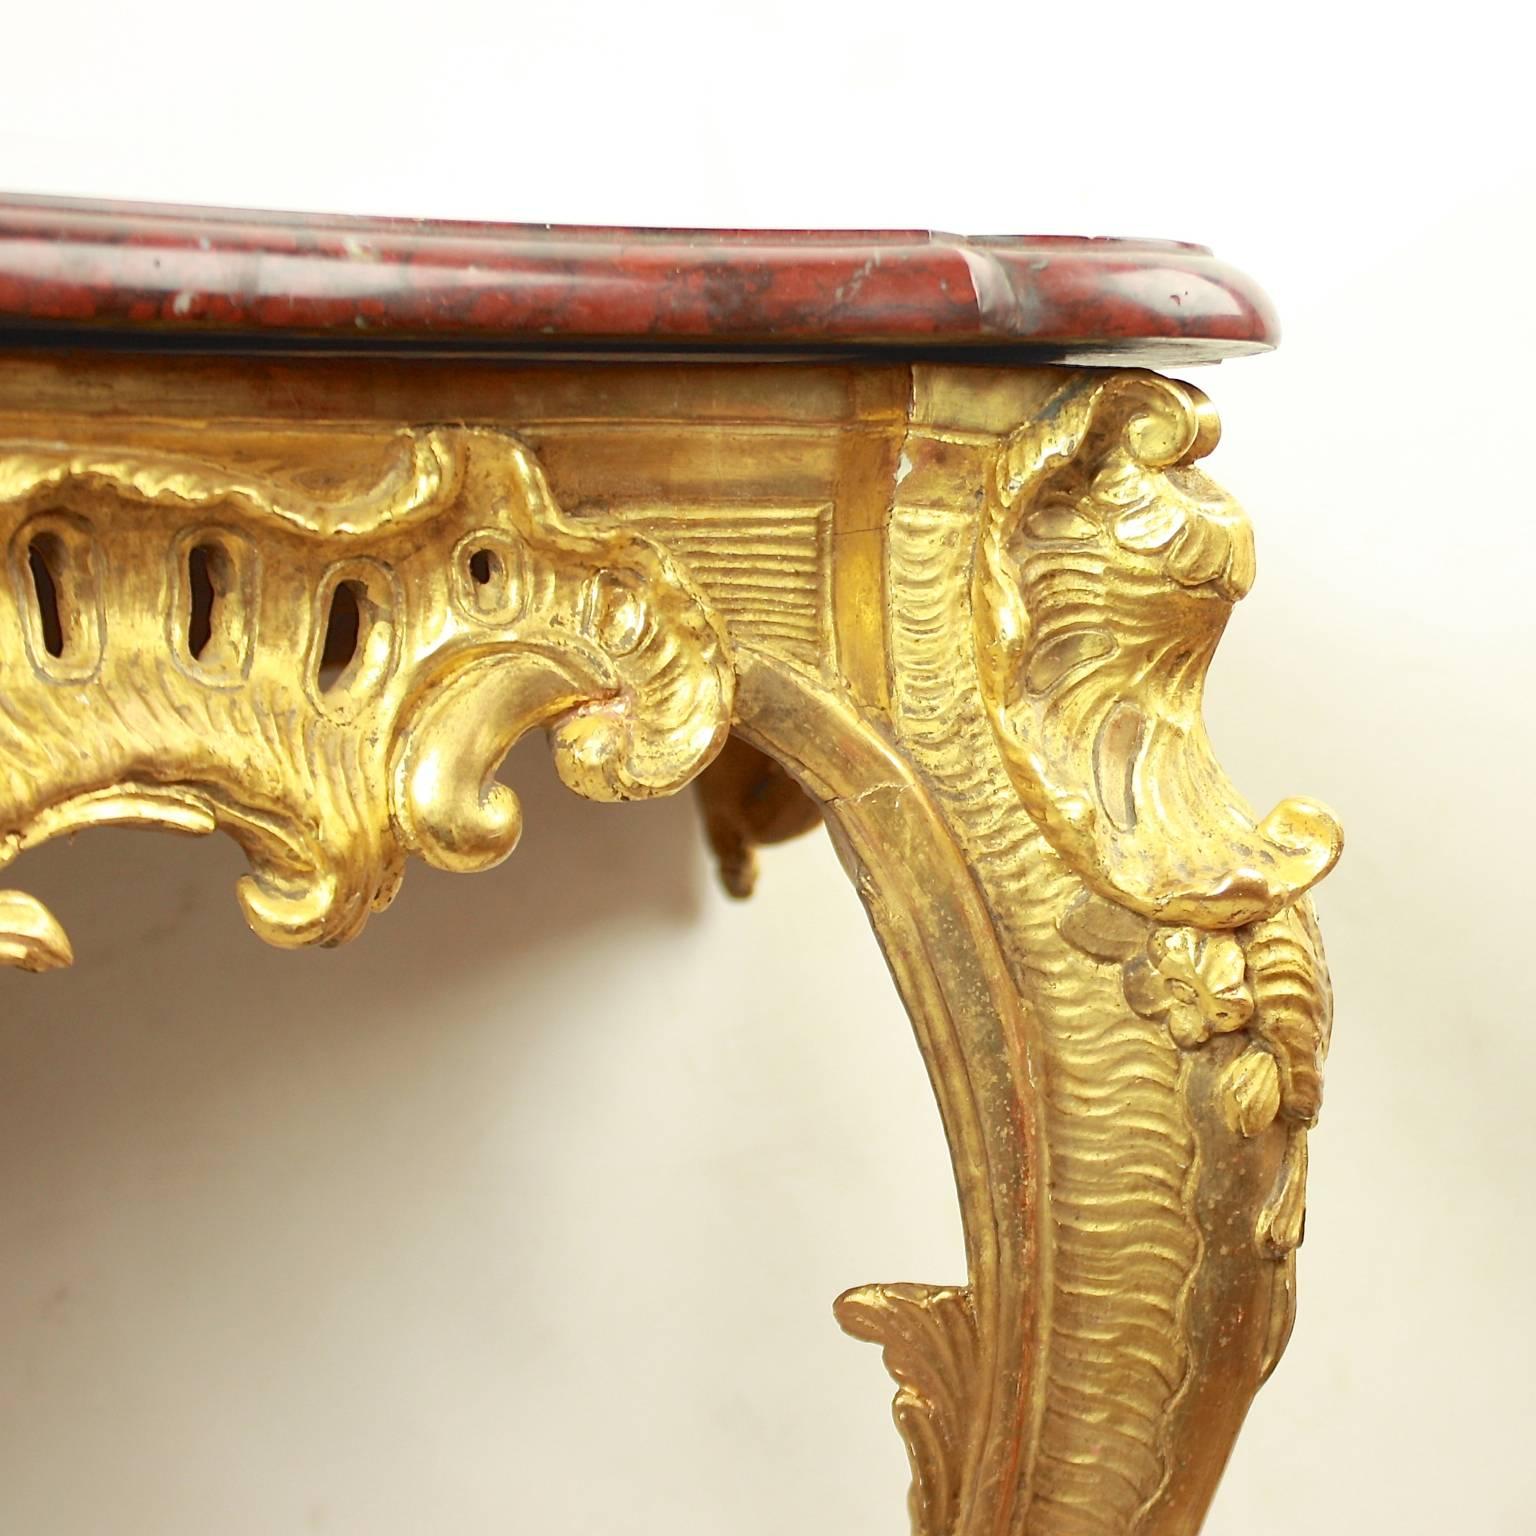 Carved French Louis XV Giltwood Console Table, Mid-18th Century